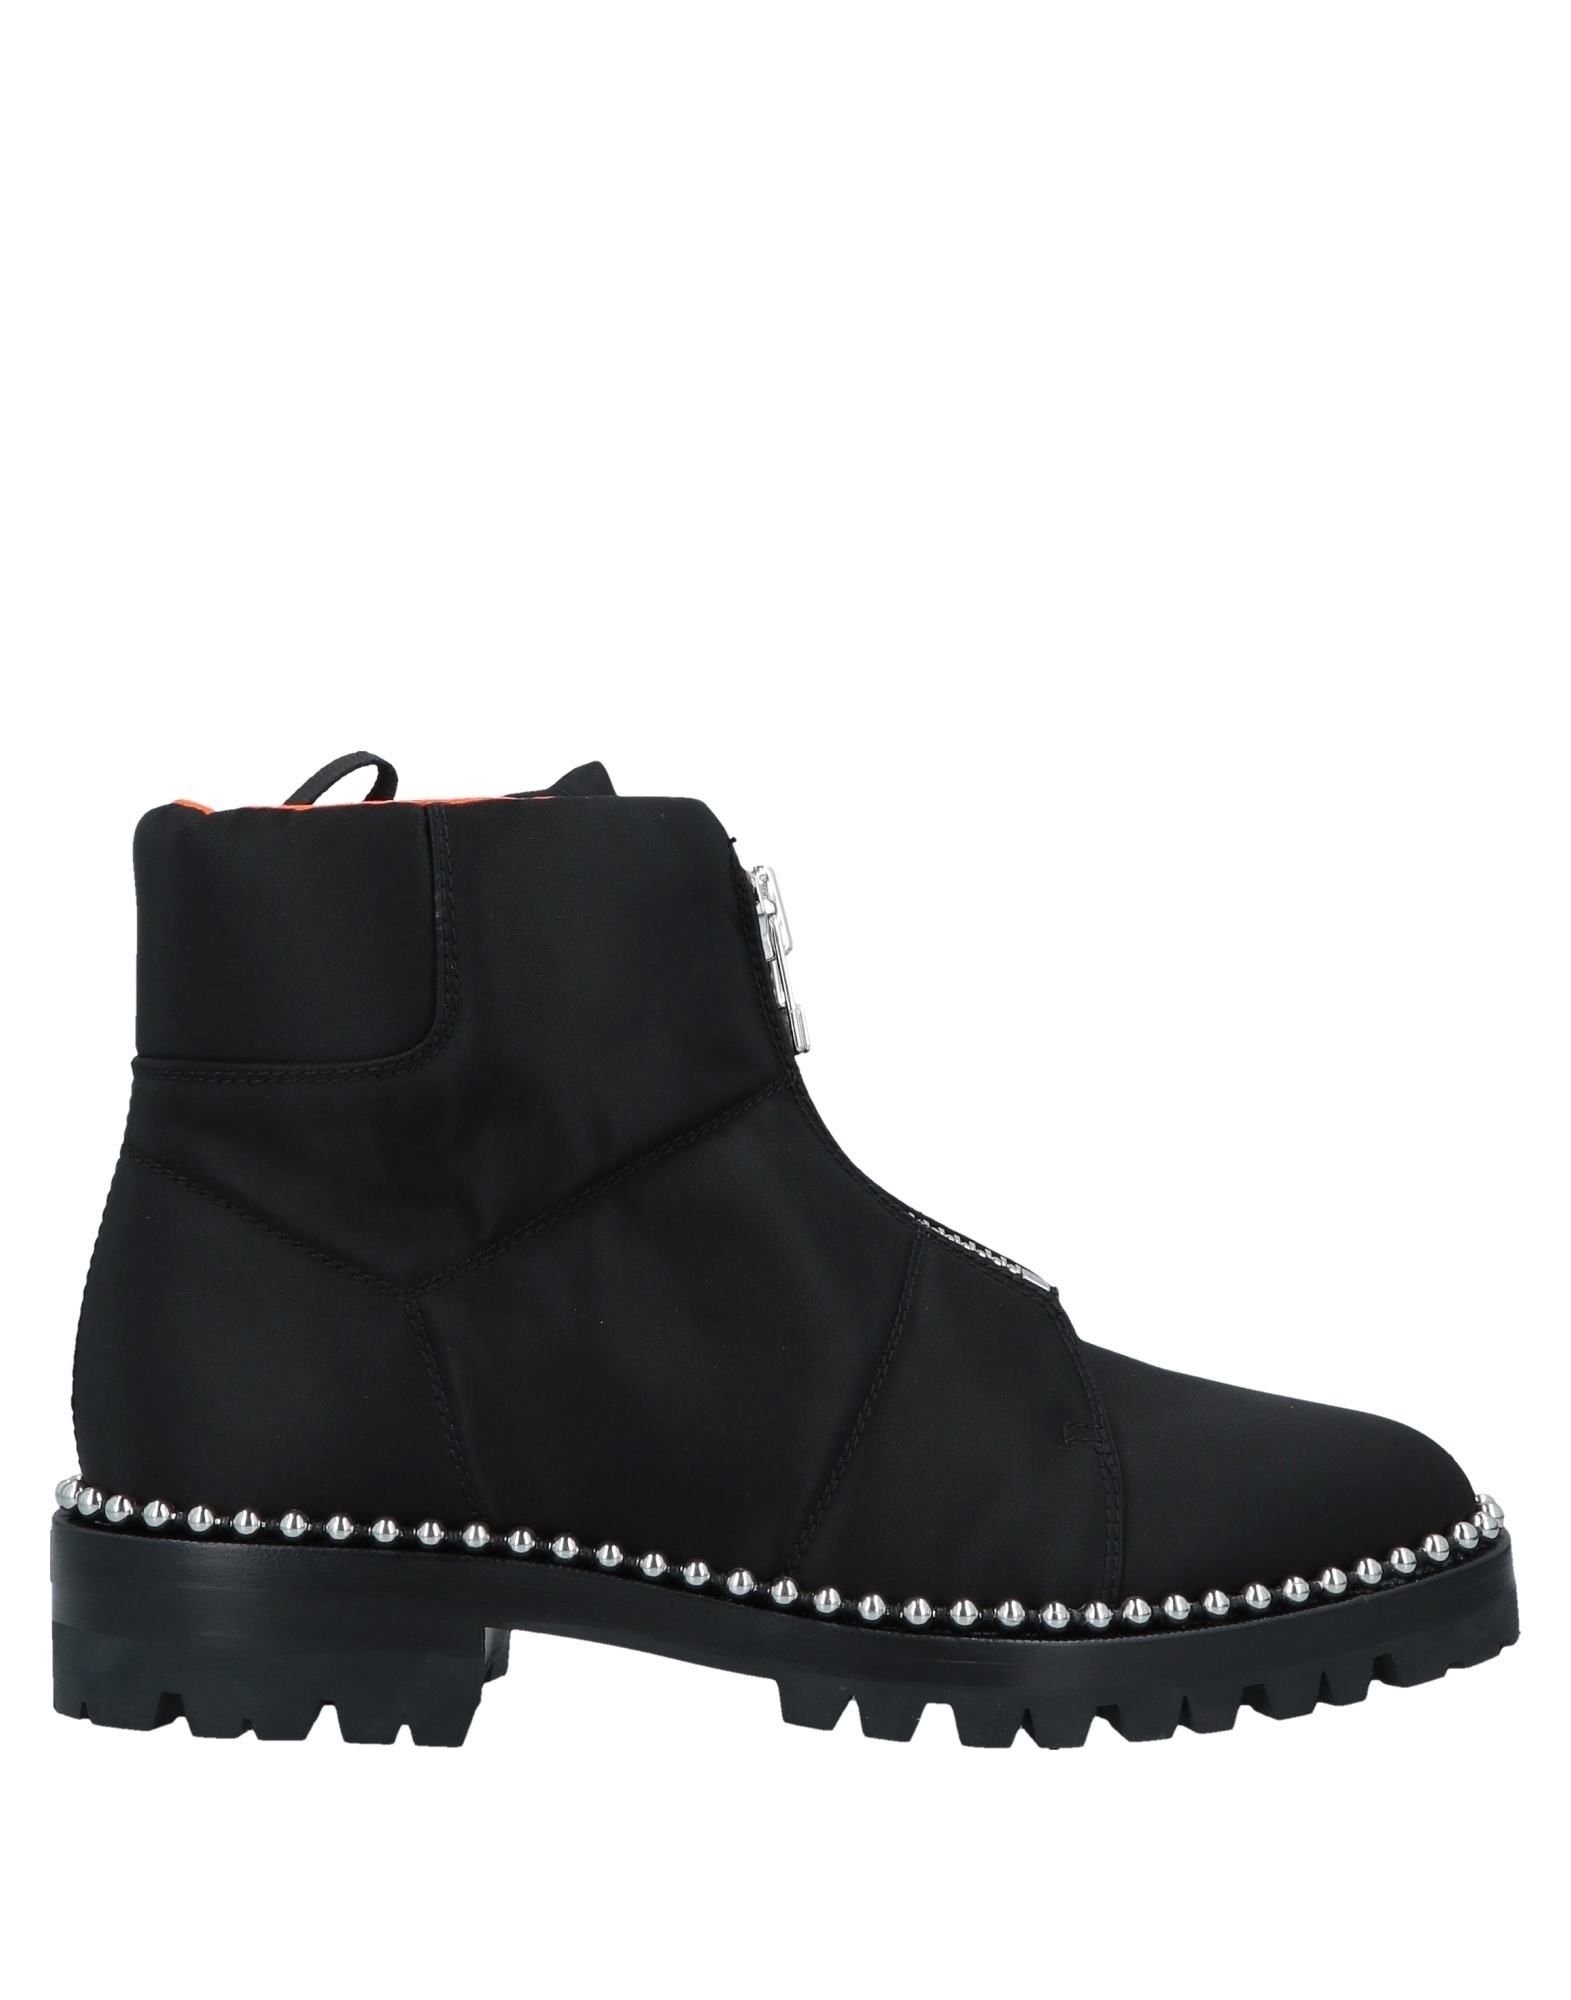 Women's ALEXANDER WANG Boots On Sale, Up To 70% Off | ModeSens